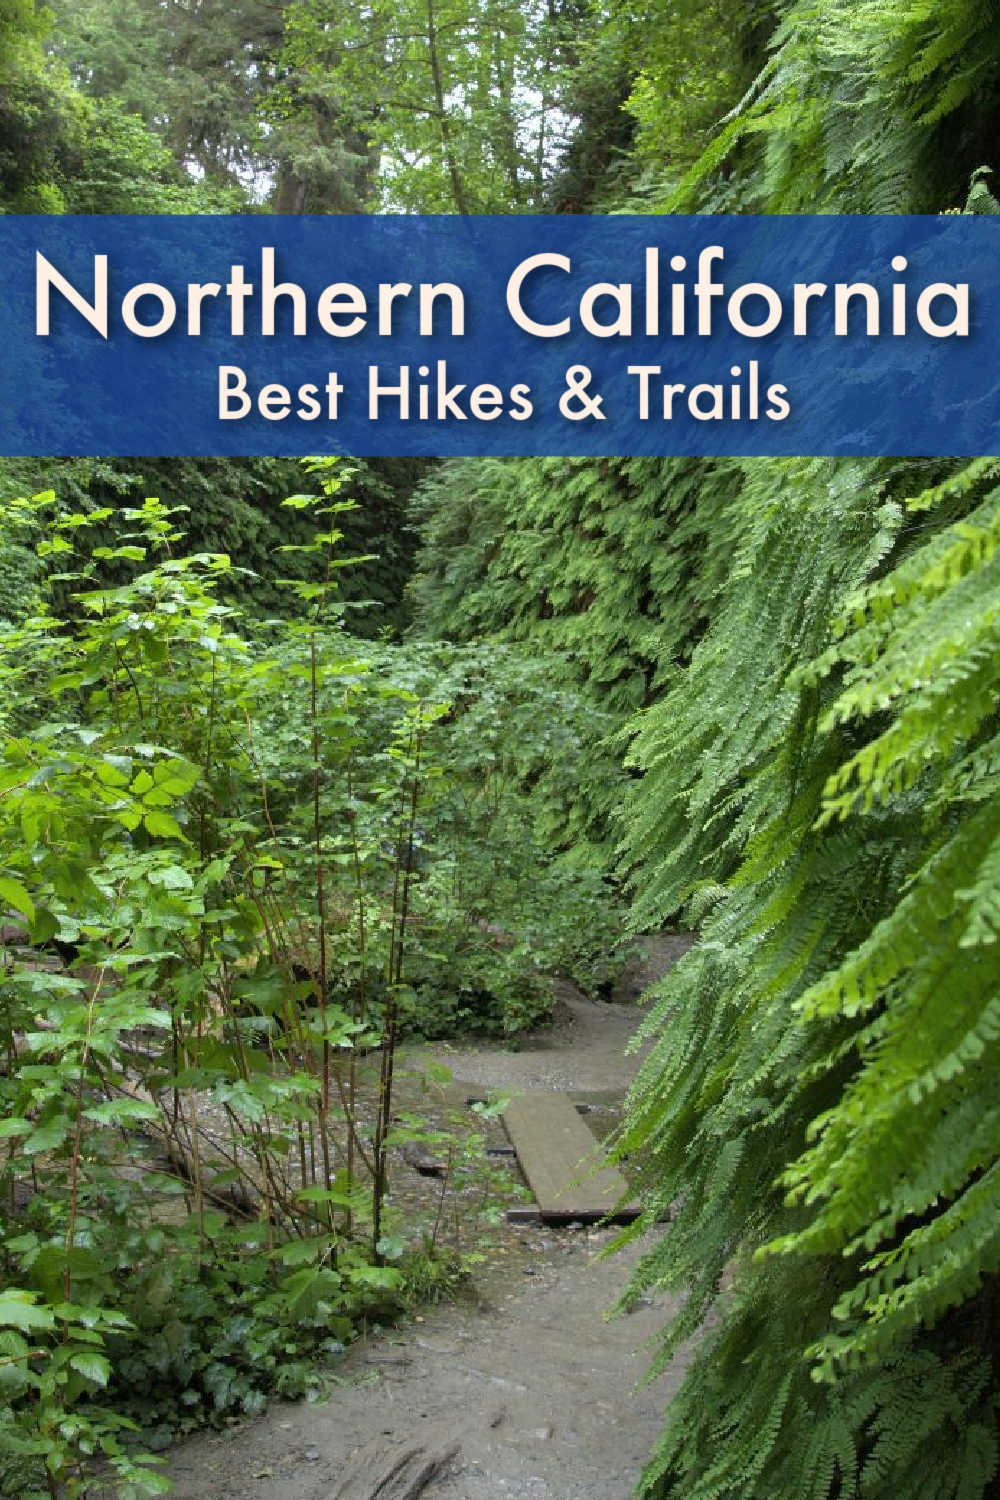 A practical guide to the best hikes in Northern California, from Lake Tahoe to Yosemite hiking trails, we covered it all. Tips about where to go for the best trails in Northern California, when to go hiking, and safety tips. Plus tours, activities, and hotel recommendations so you can enjoy some of the best hikes in California.